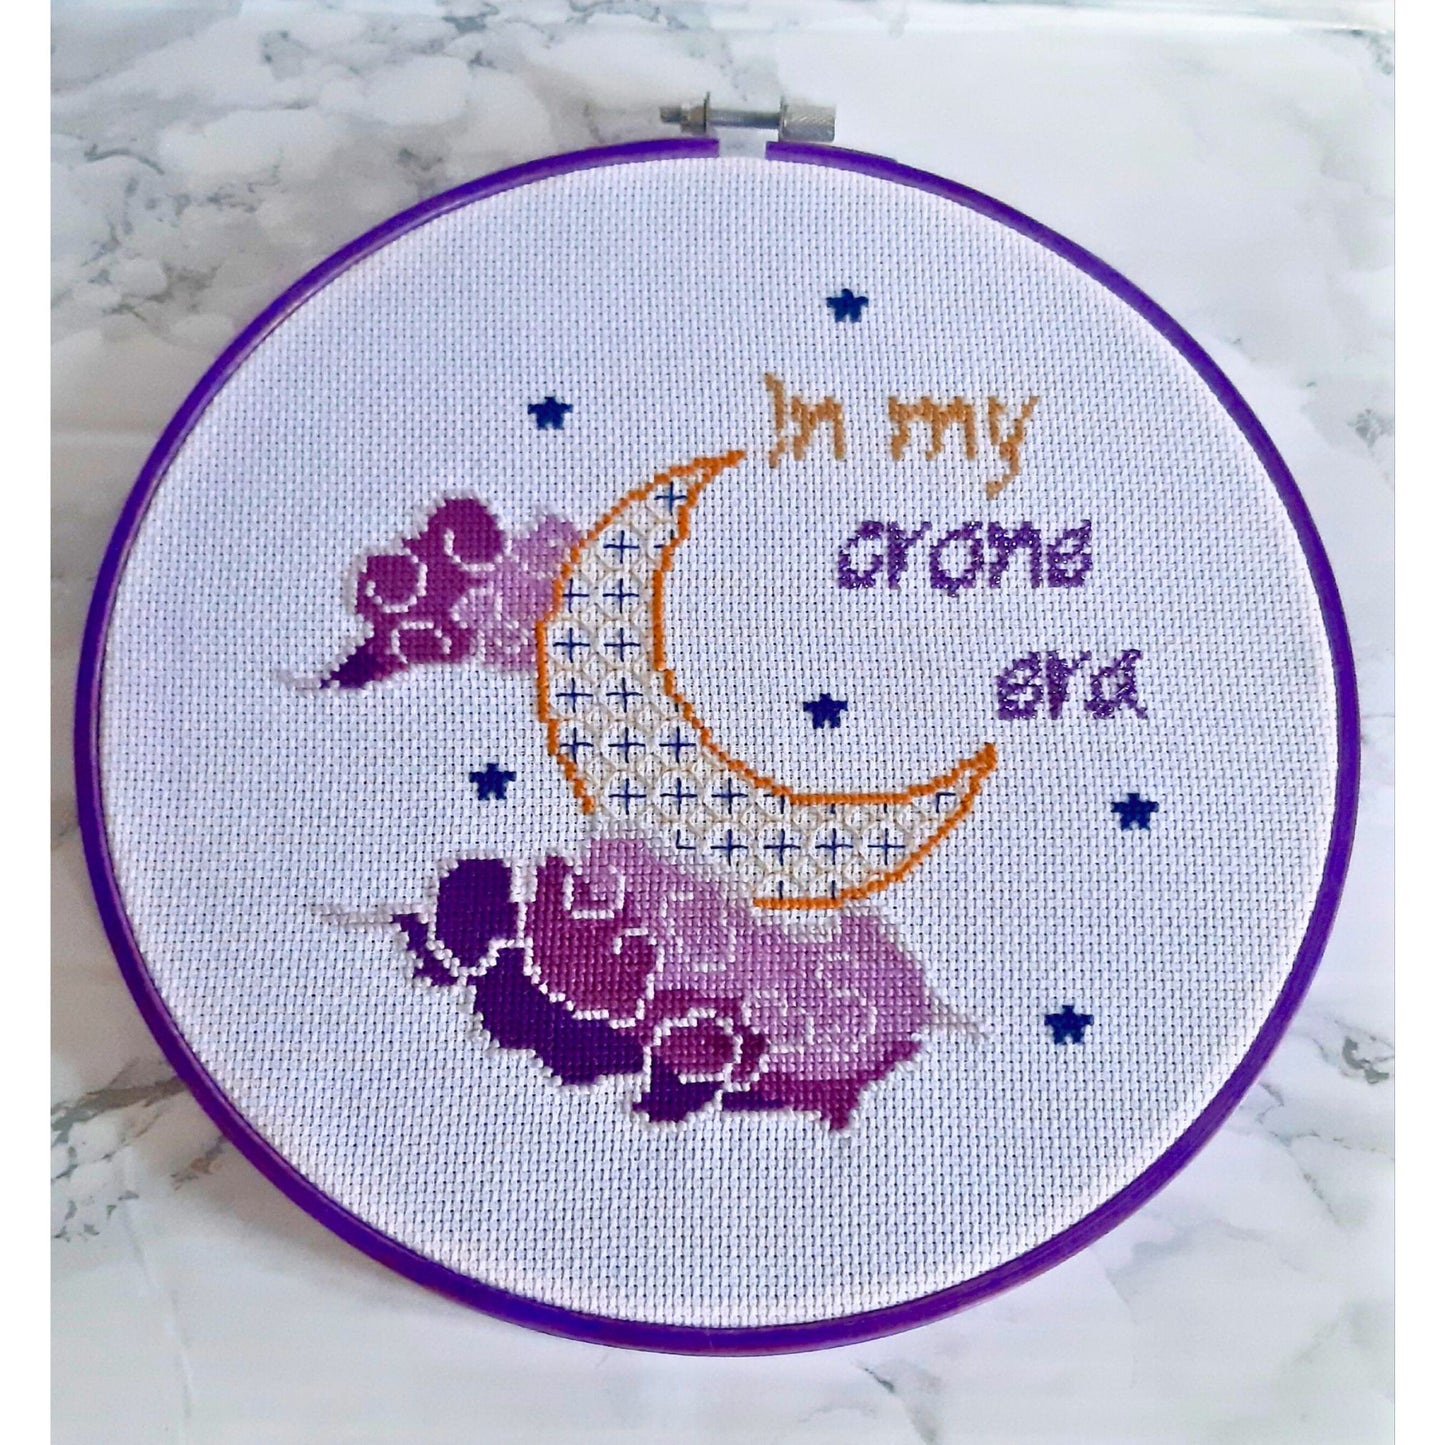 Completed cross stitch quote in an 8 inch hand dyed purple embroidery hoop. Features a moon and clouds motif and the words 'In my crone era' The piece is made up of purples and gold threadhoop